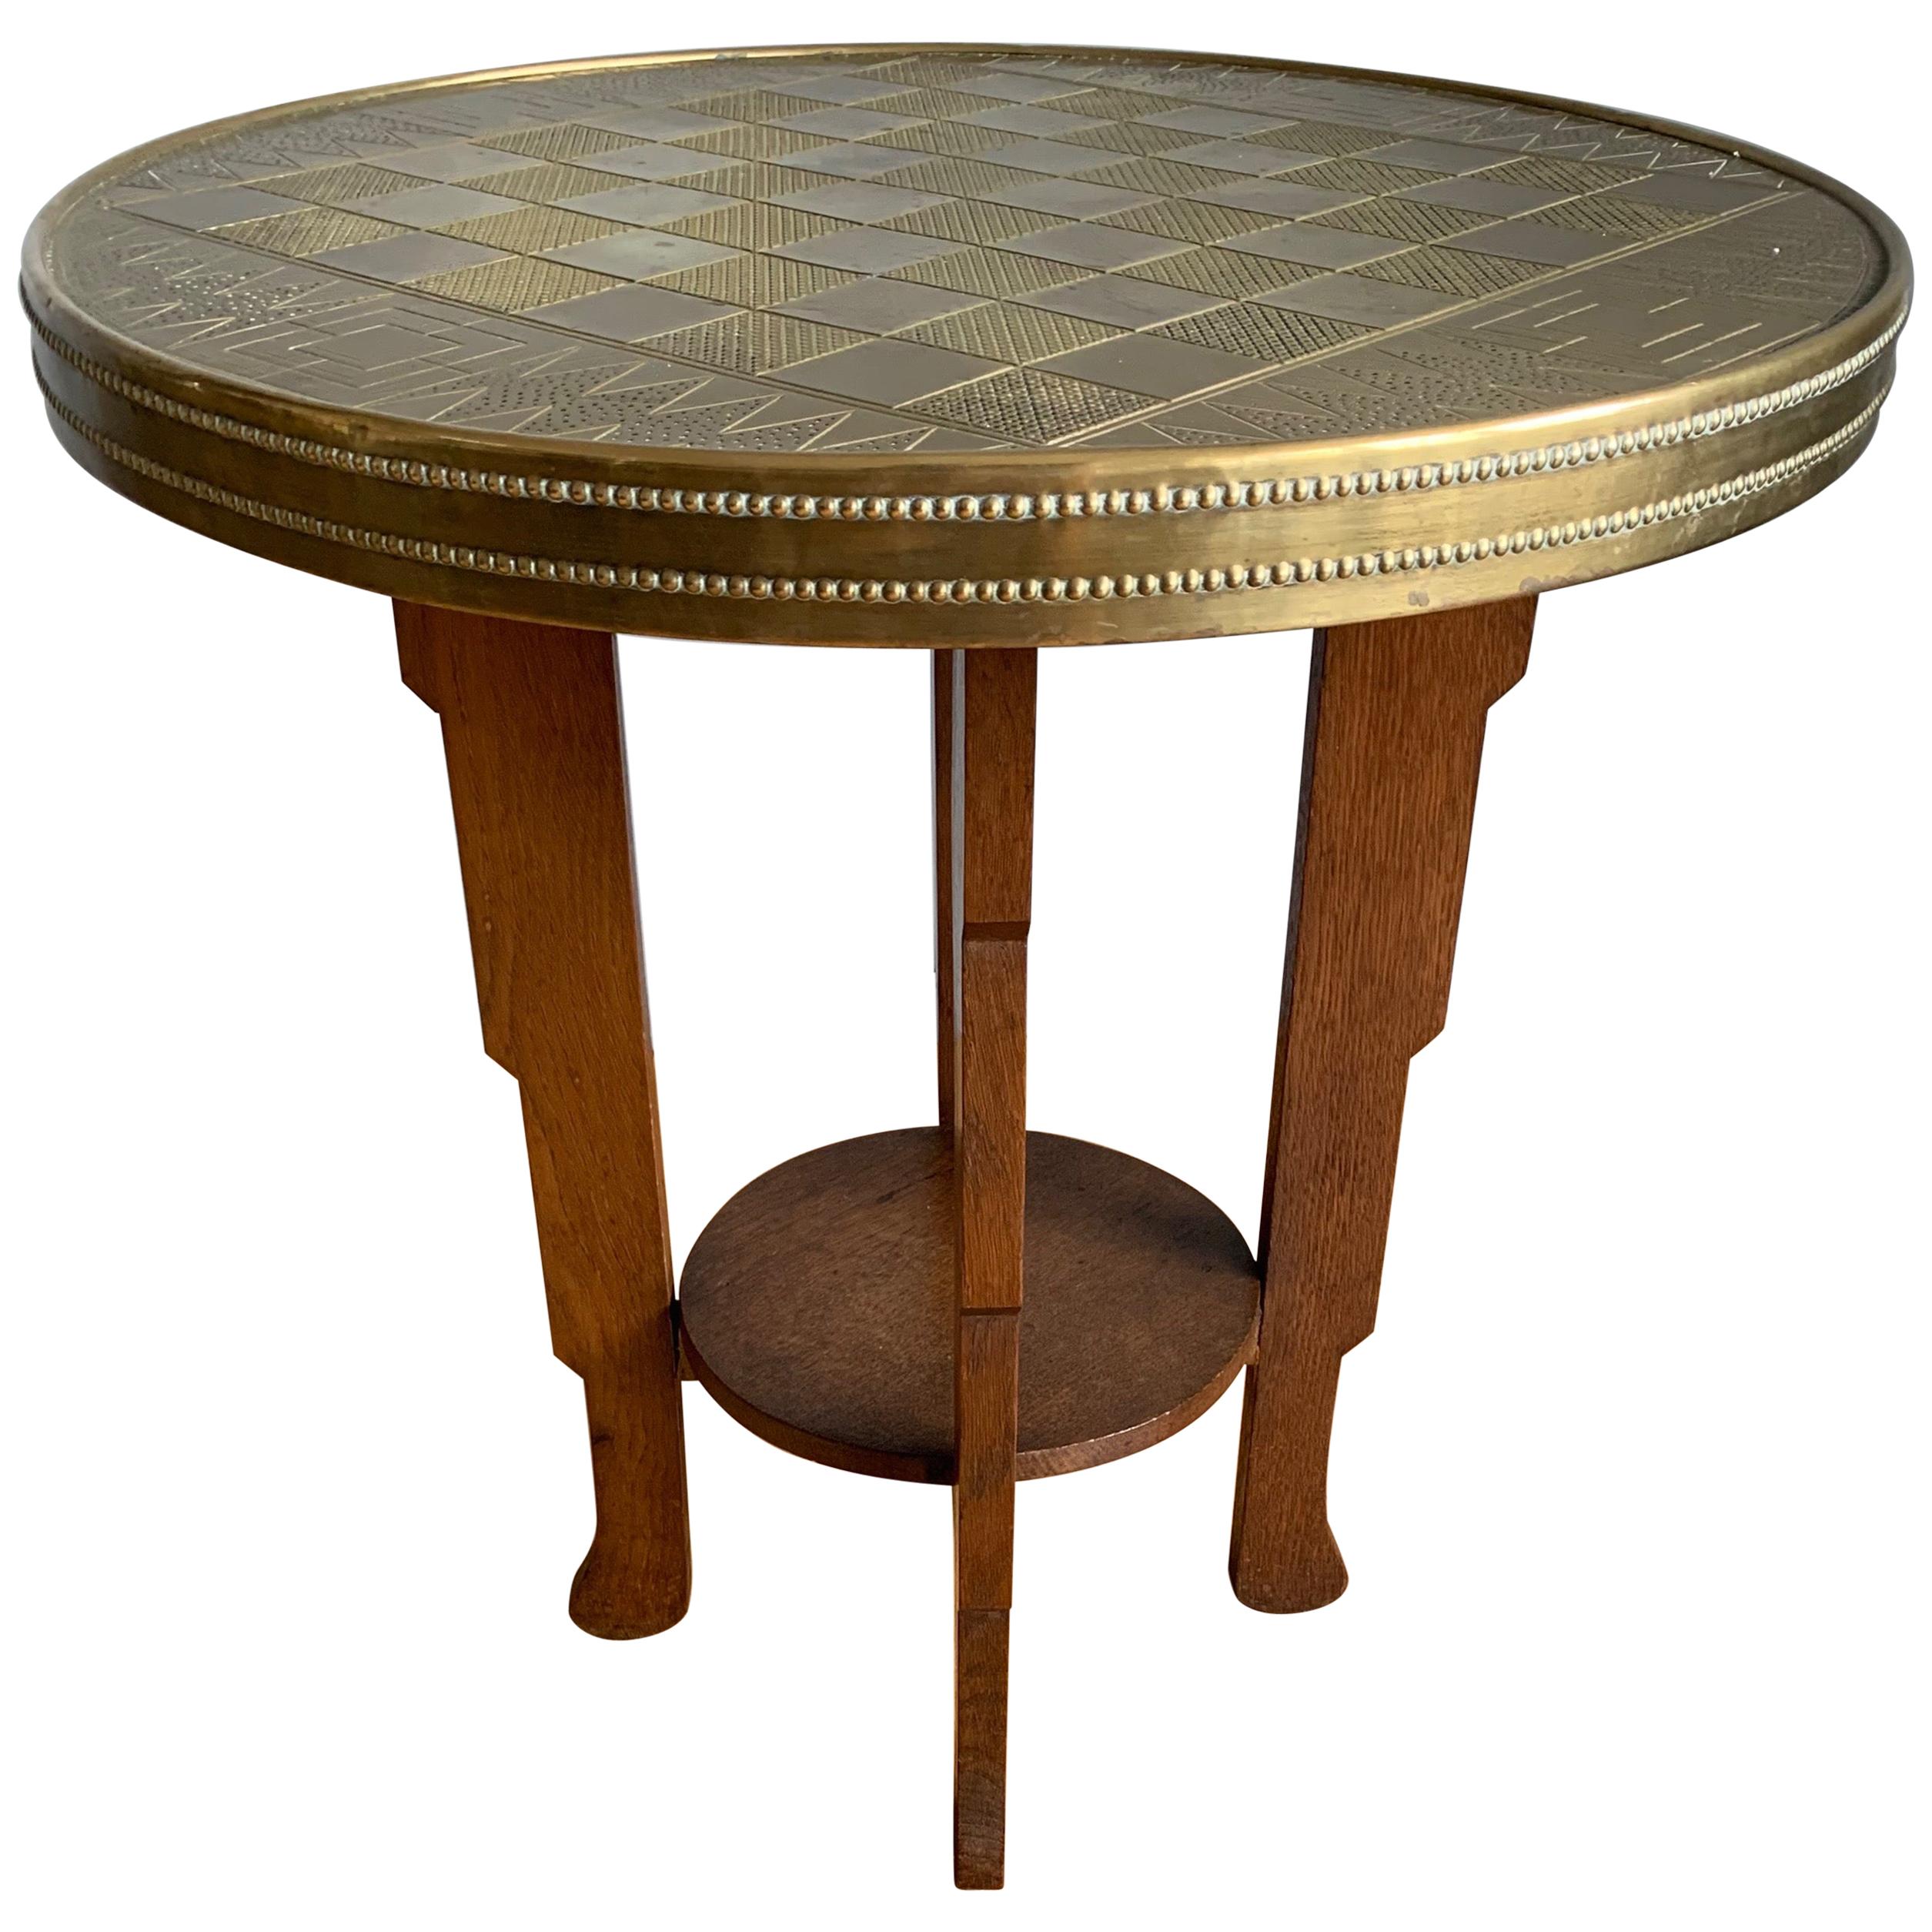 Early 1900s Stylish Dutch Art Deco Oak Chess Table with Embossed Brass Table Top